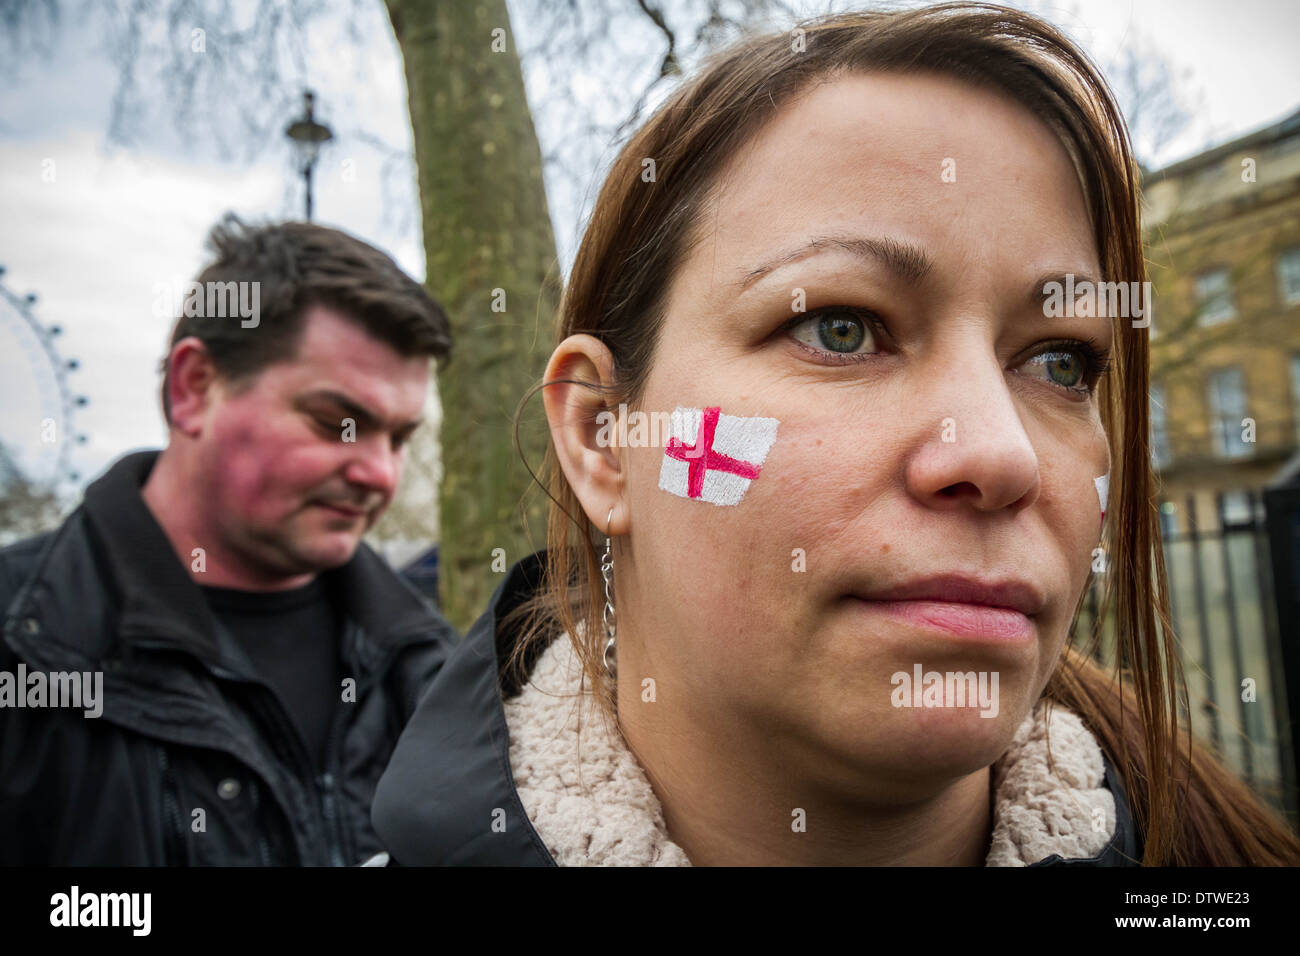 Demonstration against the discrimination of Polish people in London and UK Stock Photo